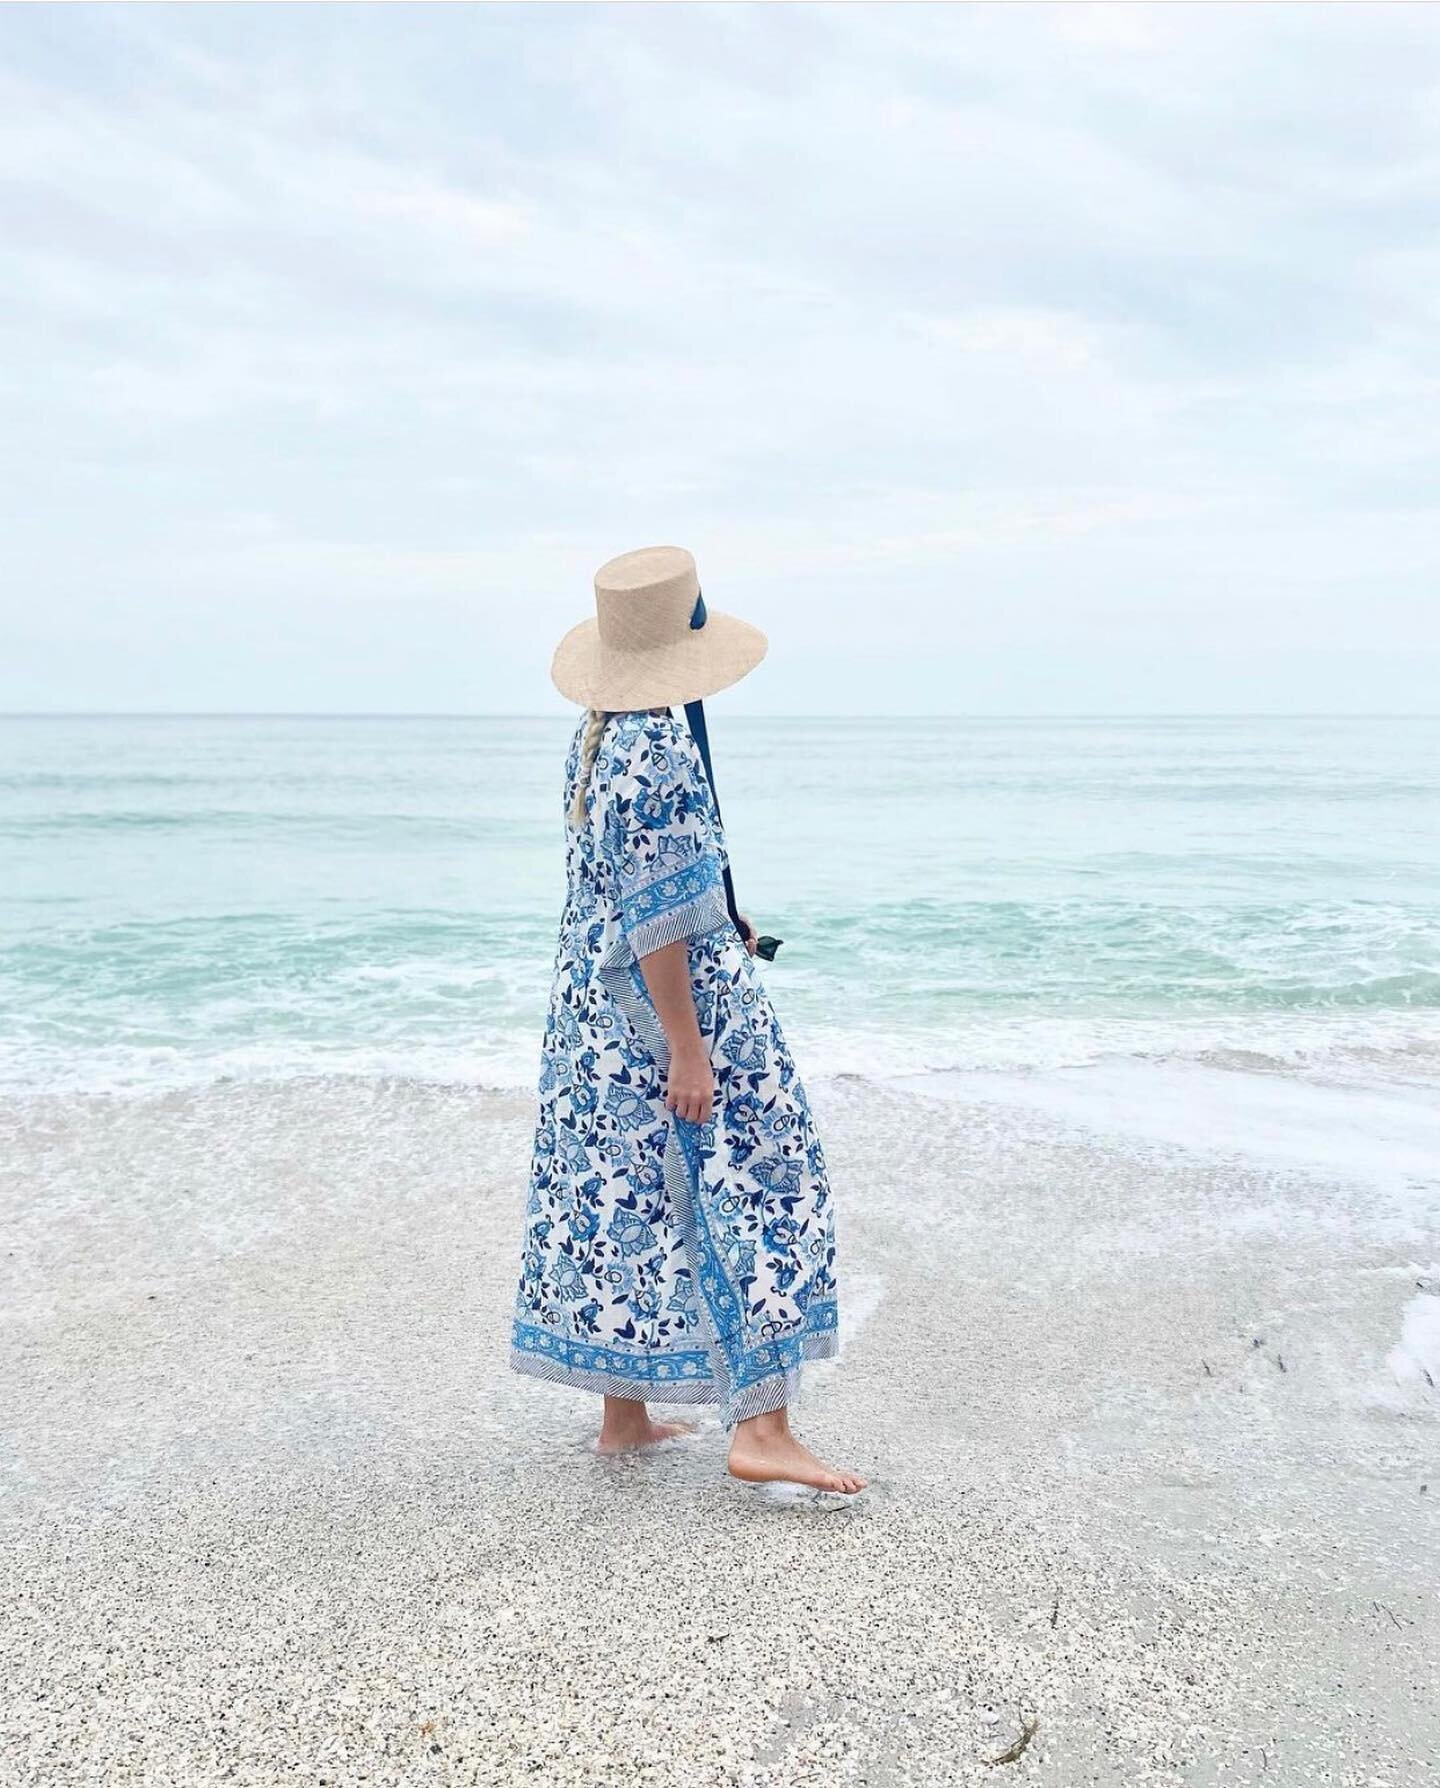 @karamillerinteriors looks amazing in the Boca Beach Dress. I am obsessed with her style and design work. She&rsquo;s definitely #onetofolllow New dress patterns are available. Link in profile.🐚